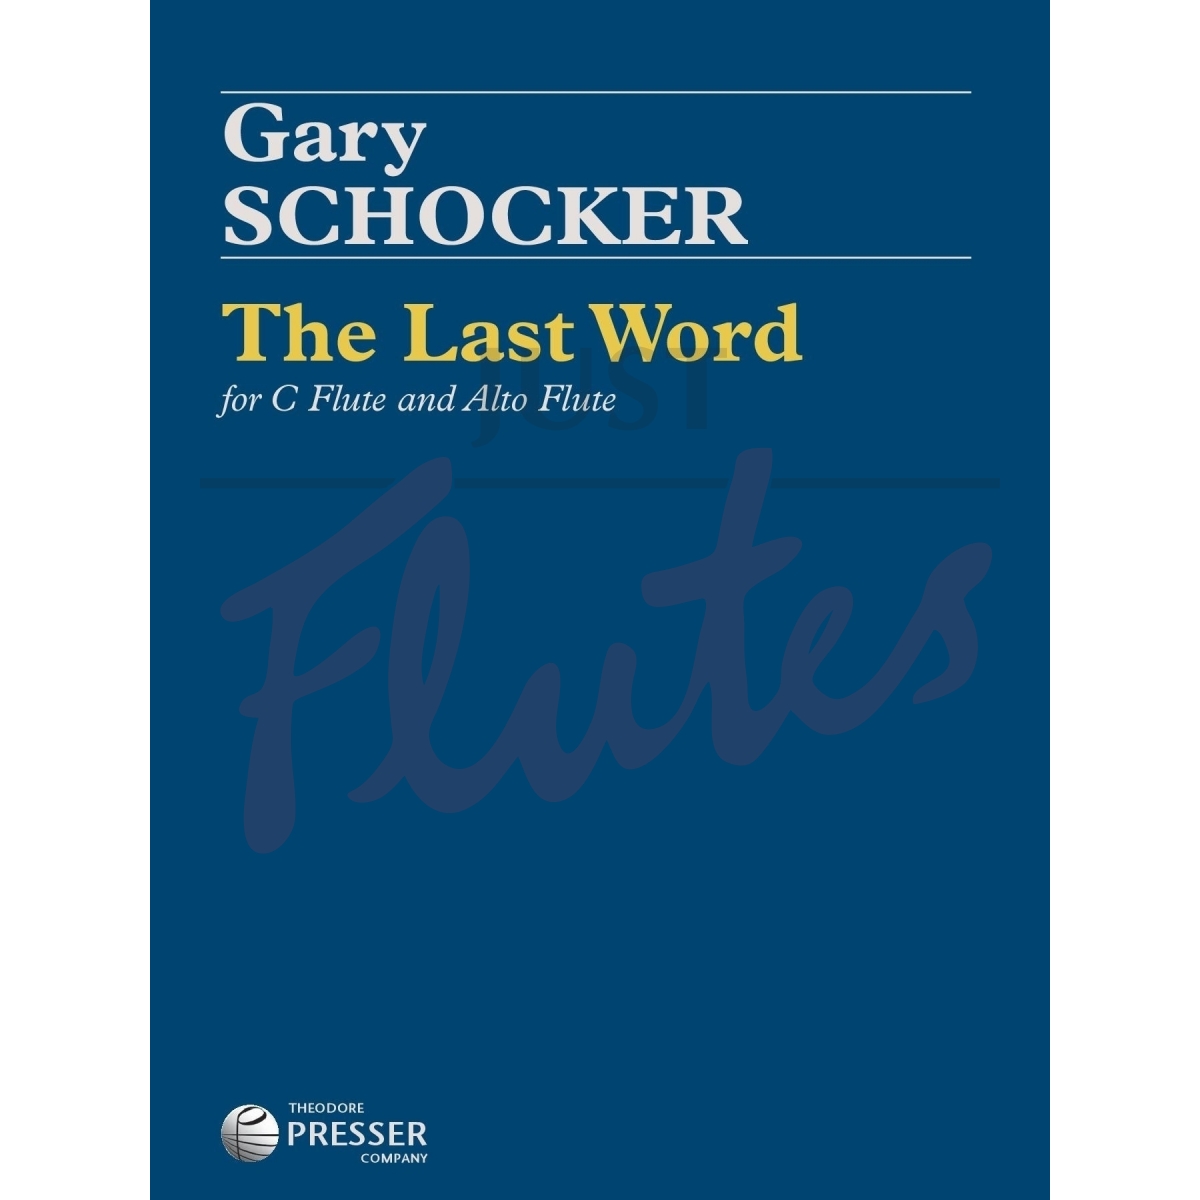 The Last Word for Flute and Alto Flute